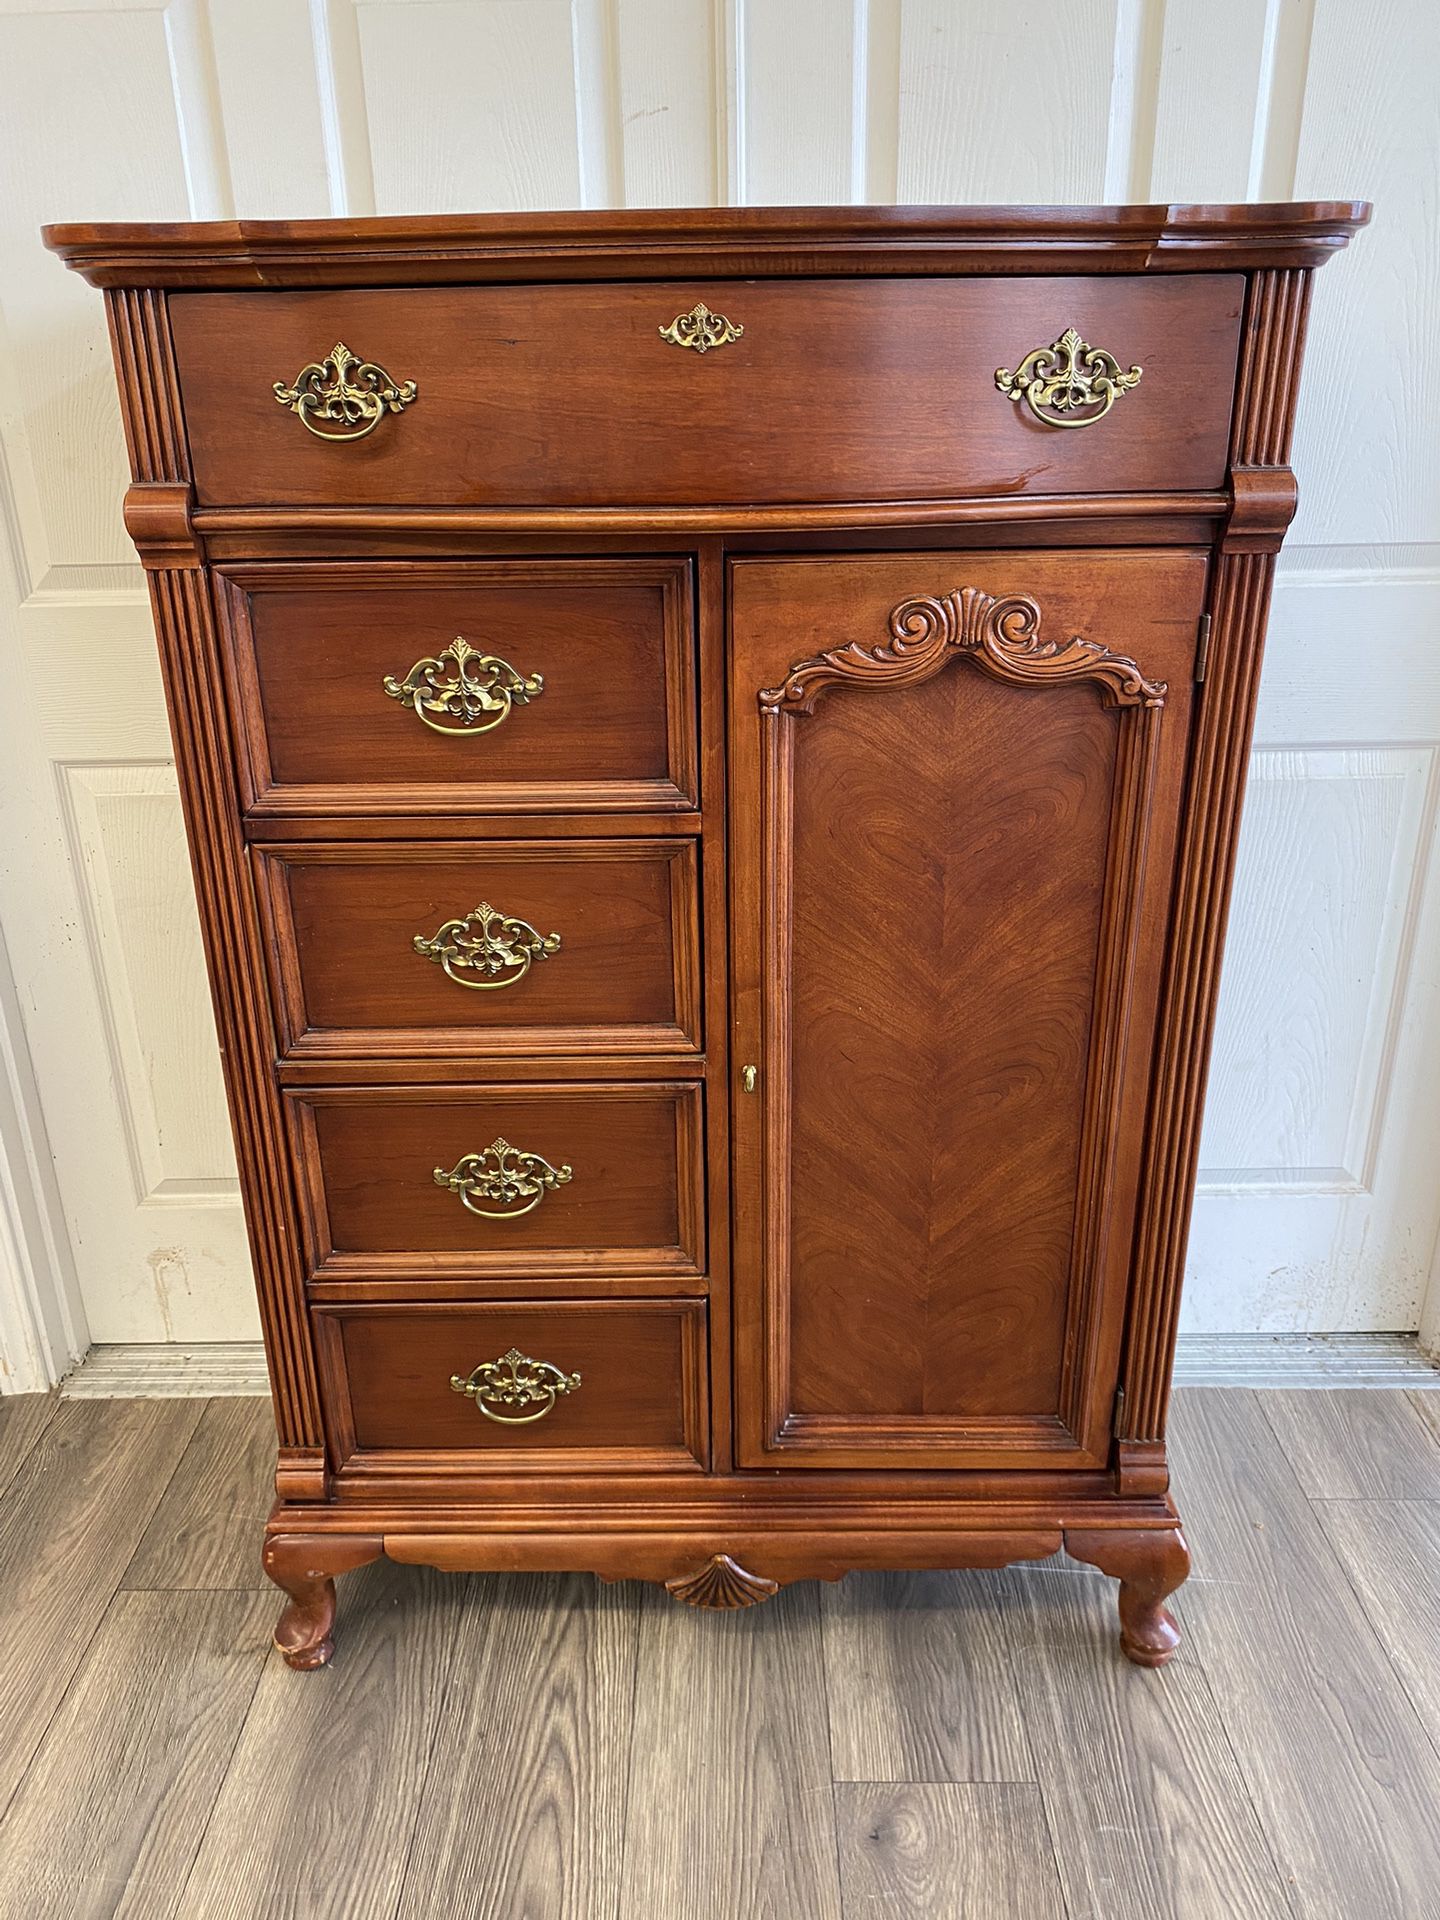 Solid Wood Tallboy Dresser Cabinet Made By Lexington Furniture